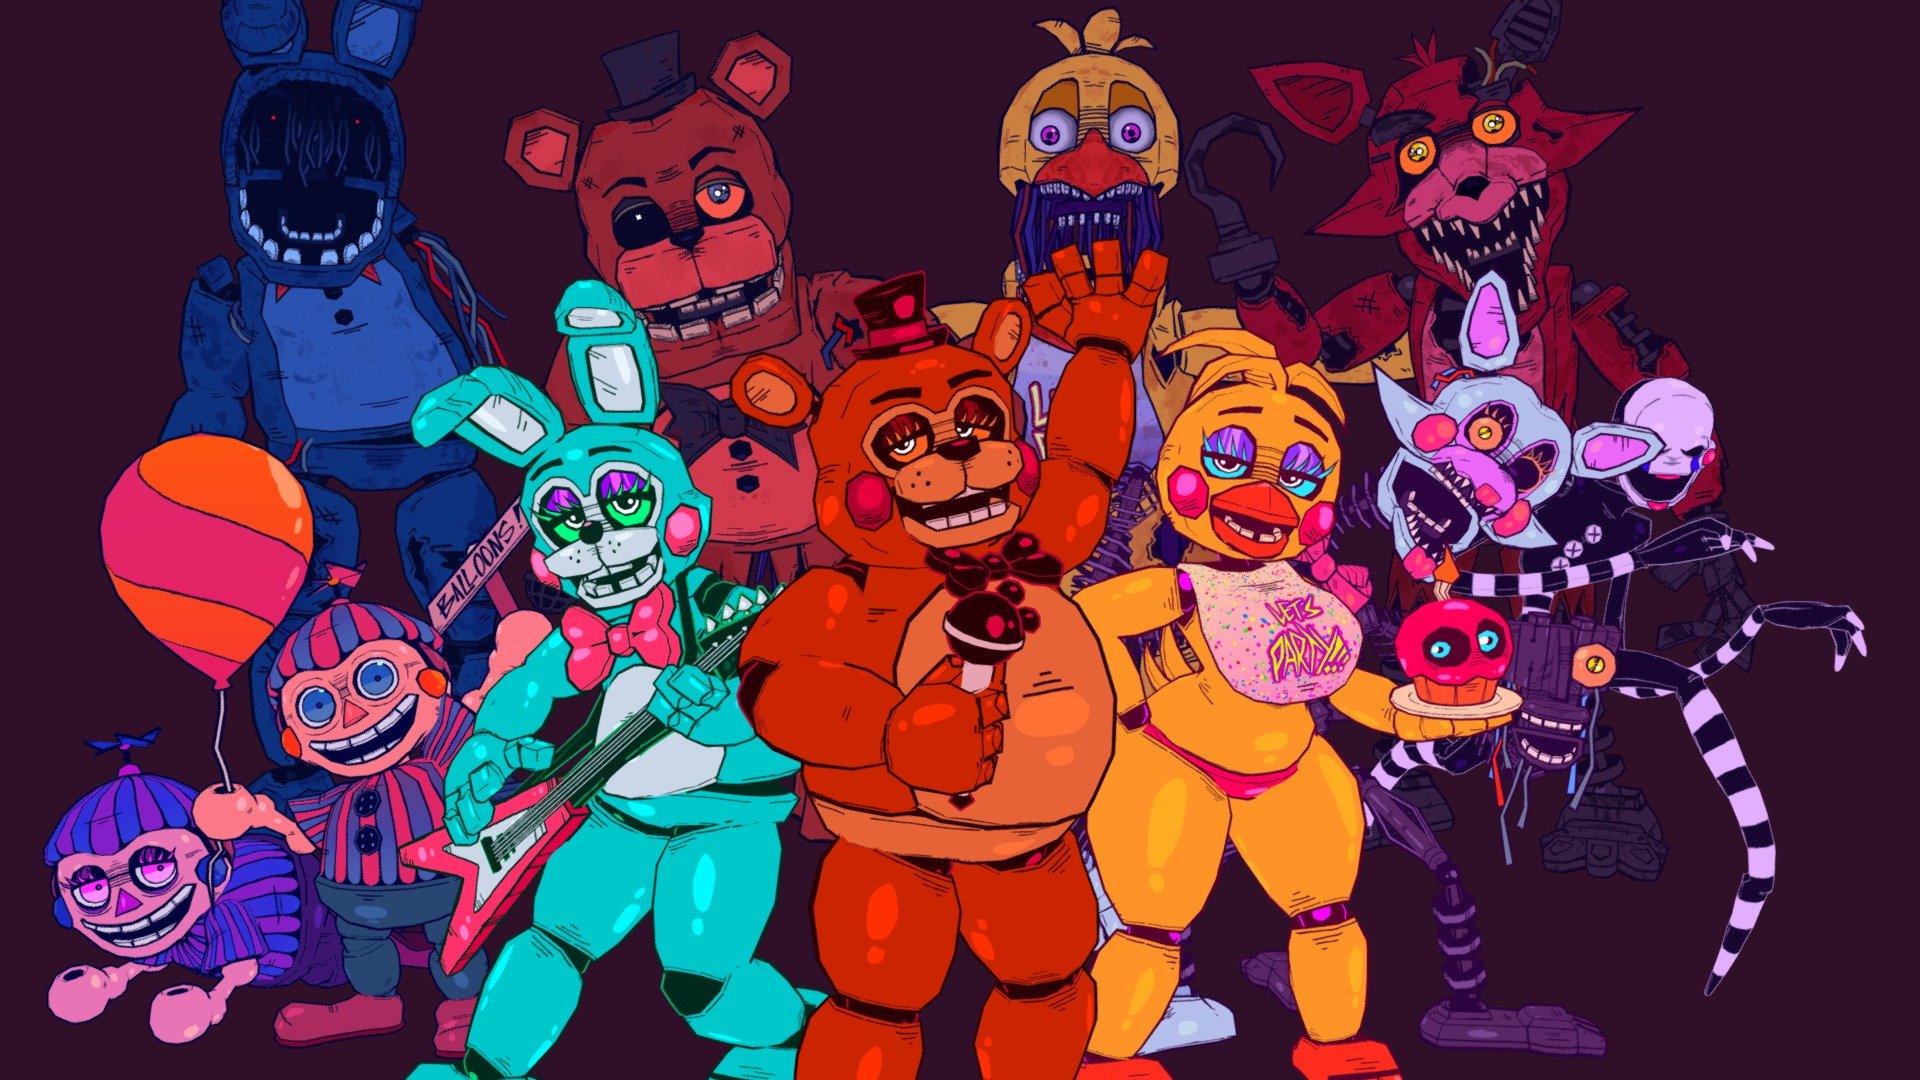 NO PLACE TO RUN, and exactly one place to hide.

Here they are, a continuation of my previous FNaF 1 models, FNaF 2!
Took over 4 months to complete, was a really fun project.

This pack includes:




Toy Freddy

Toy Bonnie

Toy Chica

Mangle

Balloon Boy

Puppet

JJ

Withered Freddy

Withered Bonnie

Withered Chica

Withered Foxy

Withered Golden Freddy

Shadow Freddy

Shadow Bonnie

Purple Guy Animatronic (Inspired by the hoax)

Each character is weight painted and some include shape keys, each character has a singular 2k texture. Made in Blender!

Feel free to port to games and such, don't give out the raw model files!
And please CREDIT ME!

Five Nights at Freddy's is owned by Scott Cawthon - Retro Five Nights at Freddy's 2 - Buy Royalty Free 3D model by VibaPop 3d model